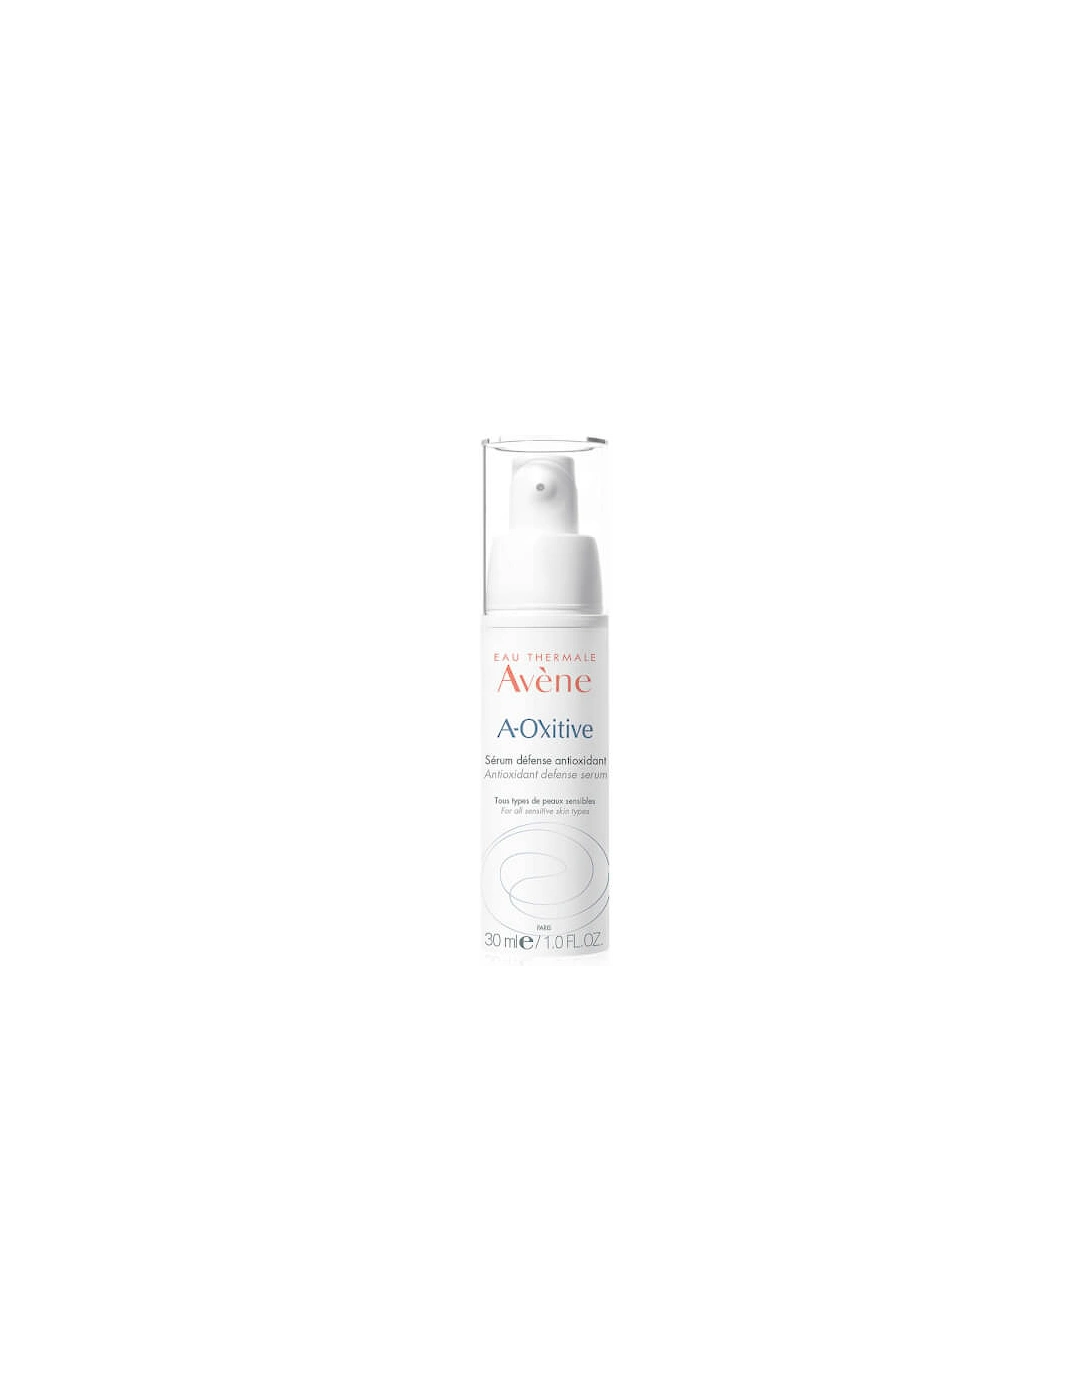 Avène A-Oxitive Antioxidant Defence Serum for First Signs of Ageing 30ml - Avene, 2 of 1